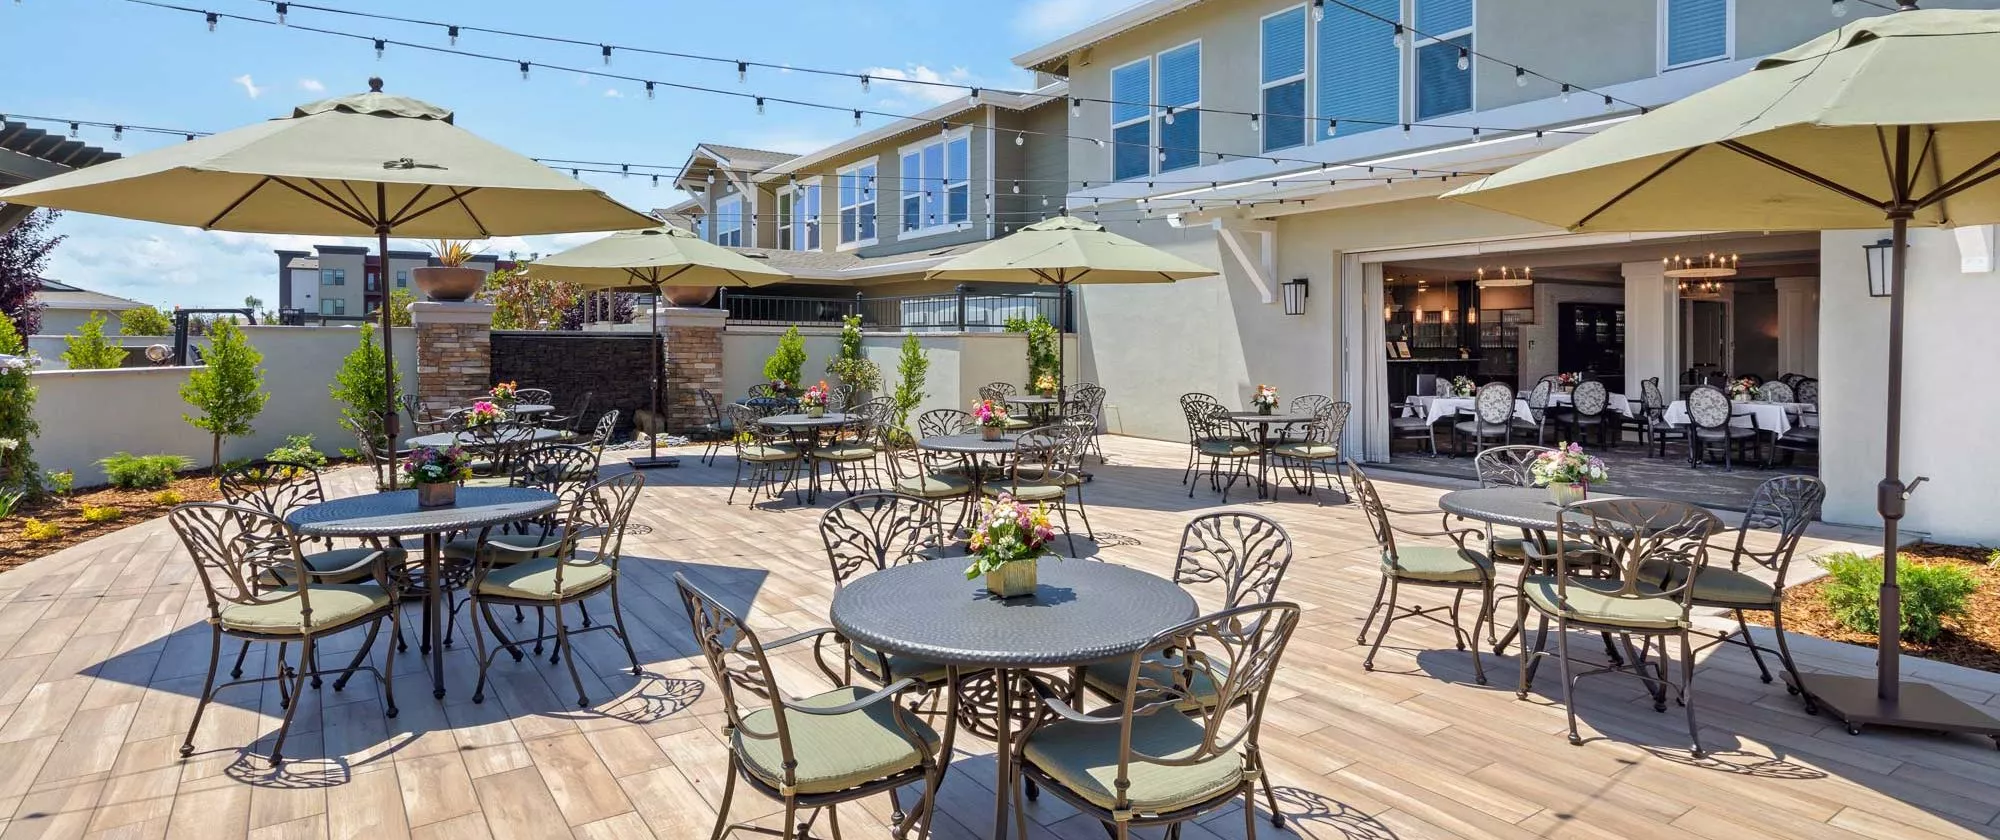 Lodi patio with string lights and dining tables